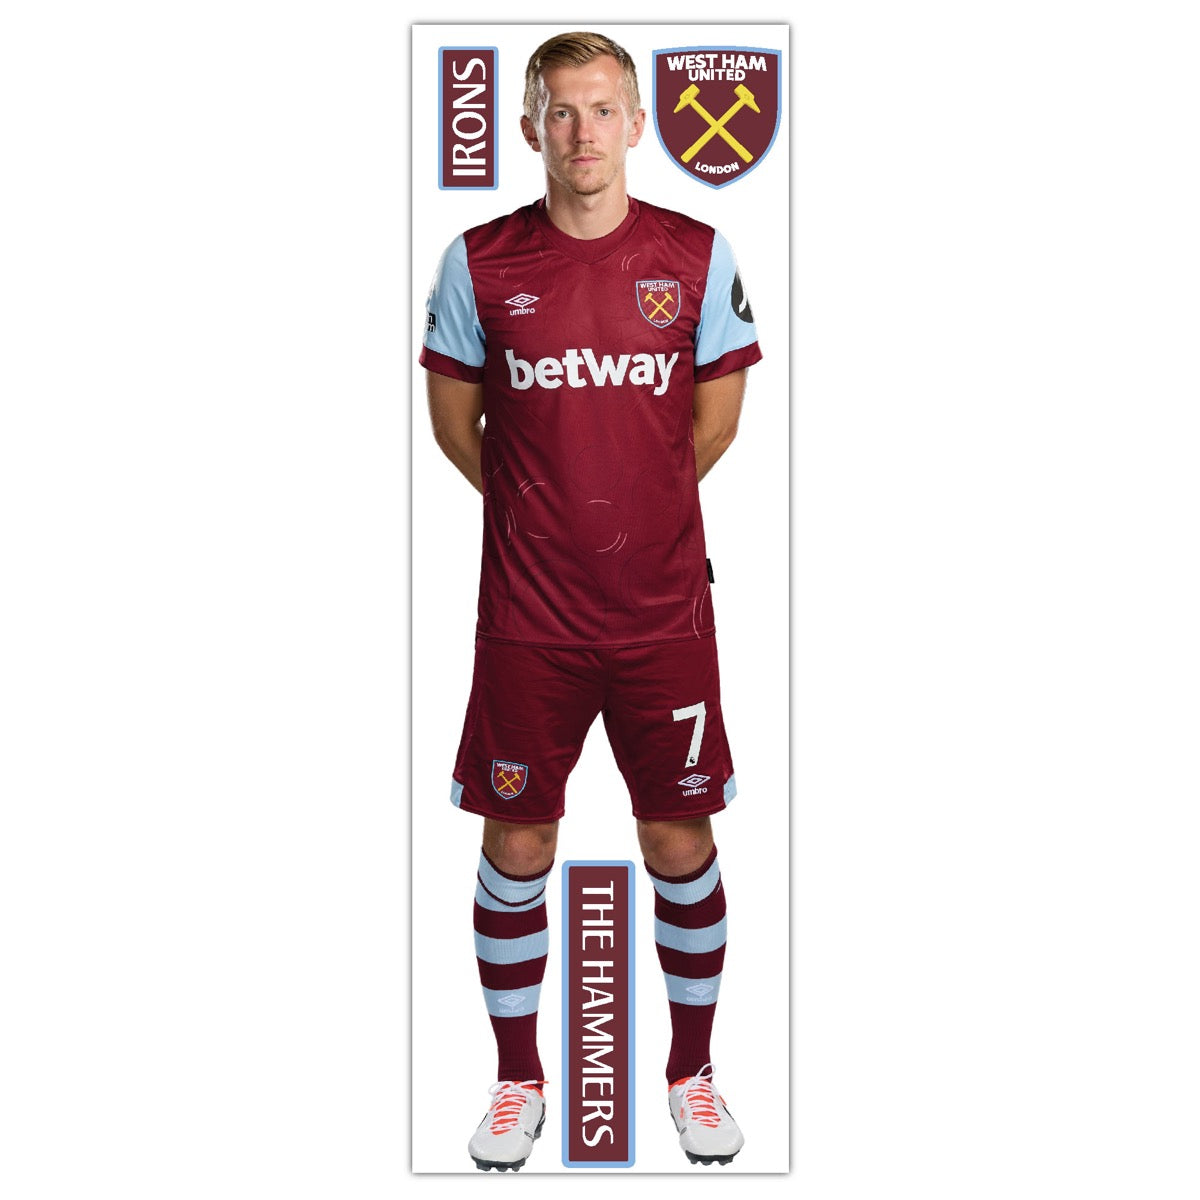 West Ham United Football Club - James Ward-Prowse 23/24 Player Wall Sticker + Hammers Decals